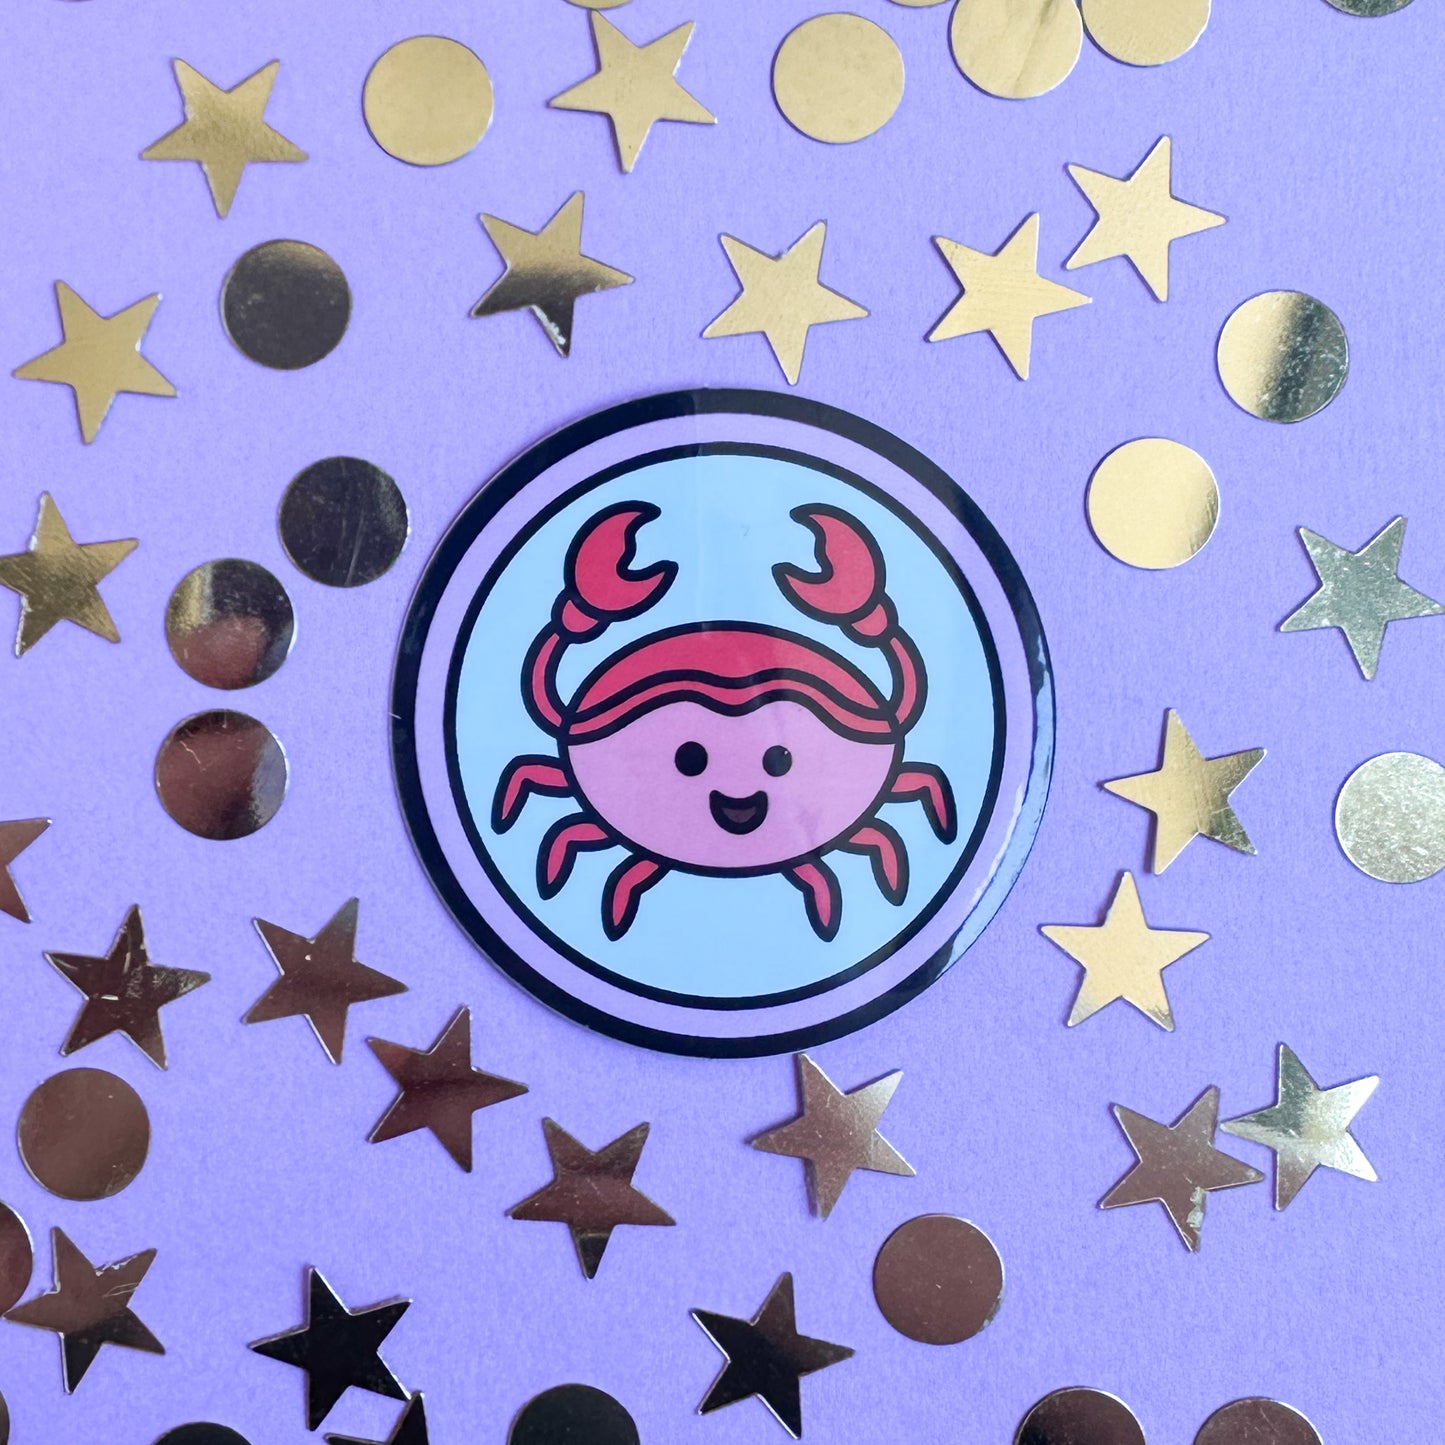 A circle sticker with a cute crab illustration in it to represent the cancer zodiac sign. The sticker is on a purple background with gold glitter stars and circles around it. 